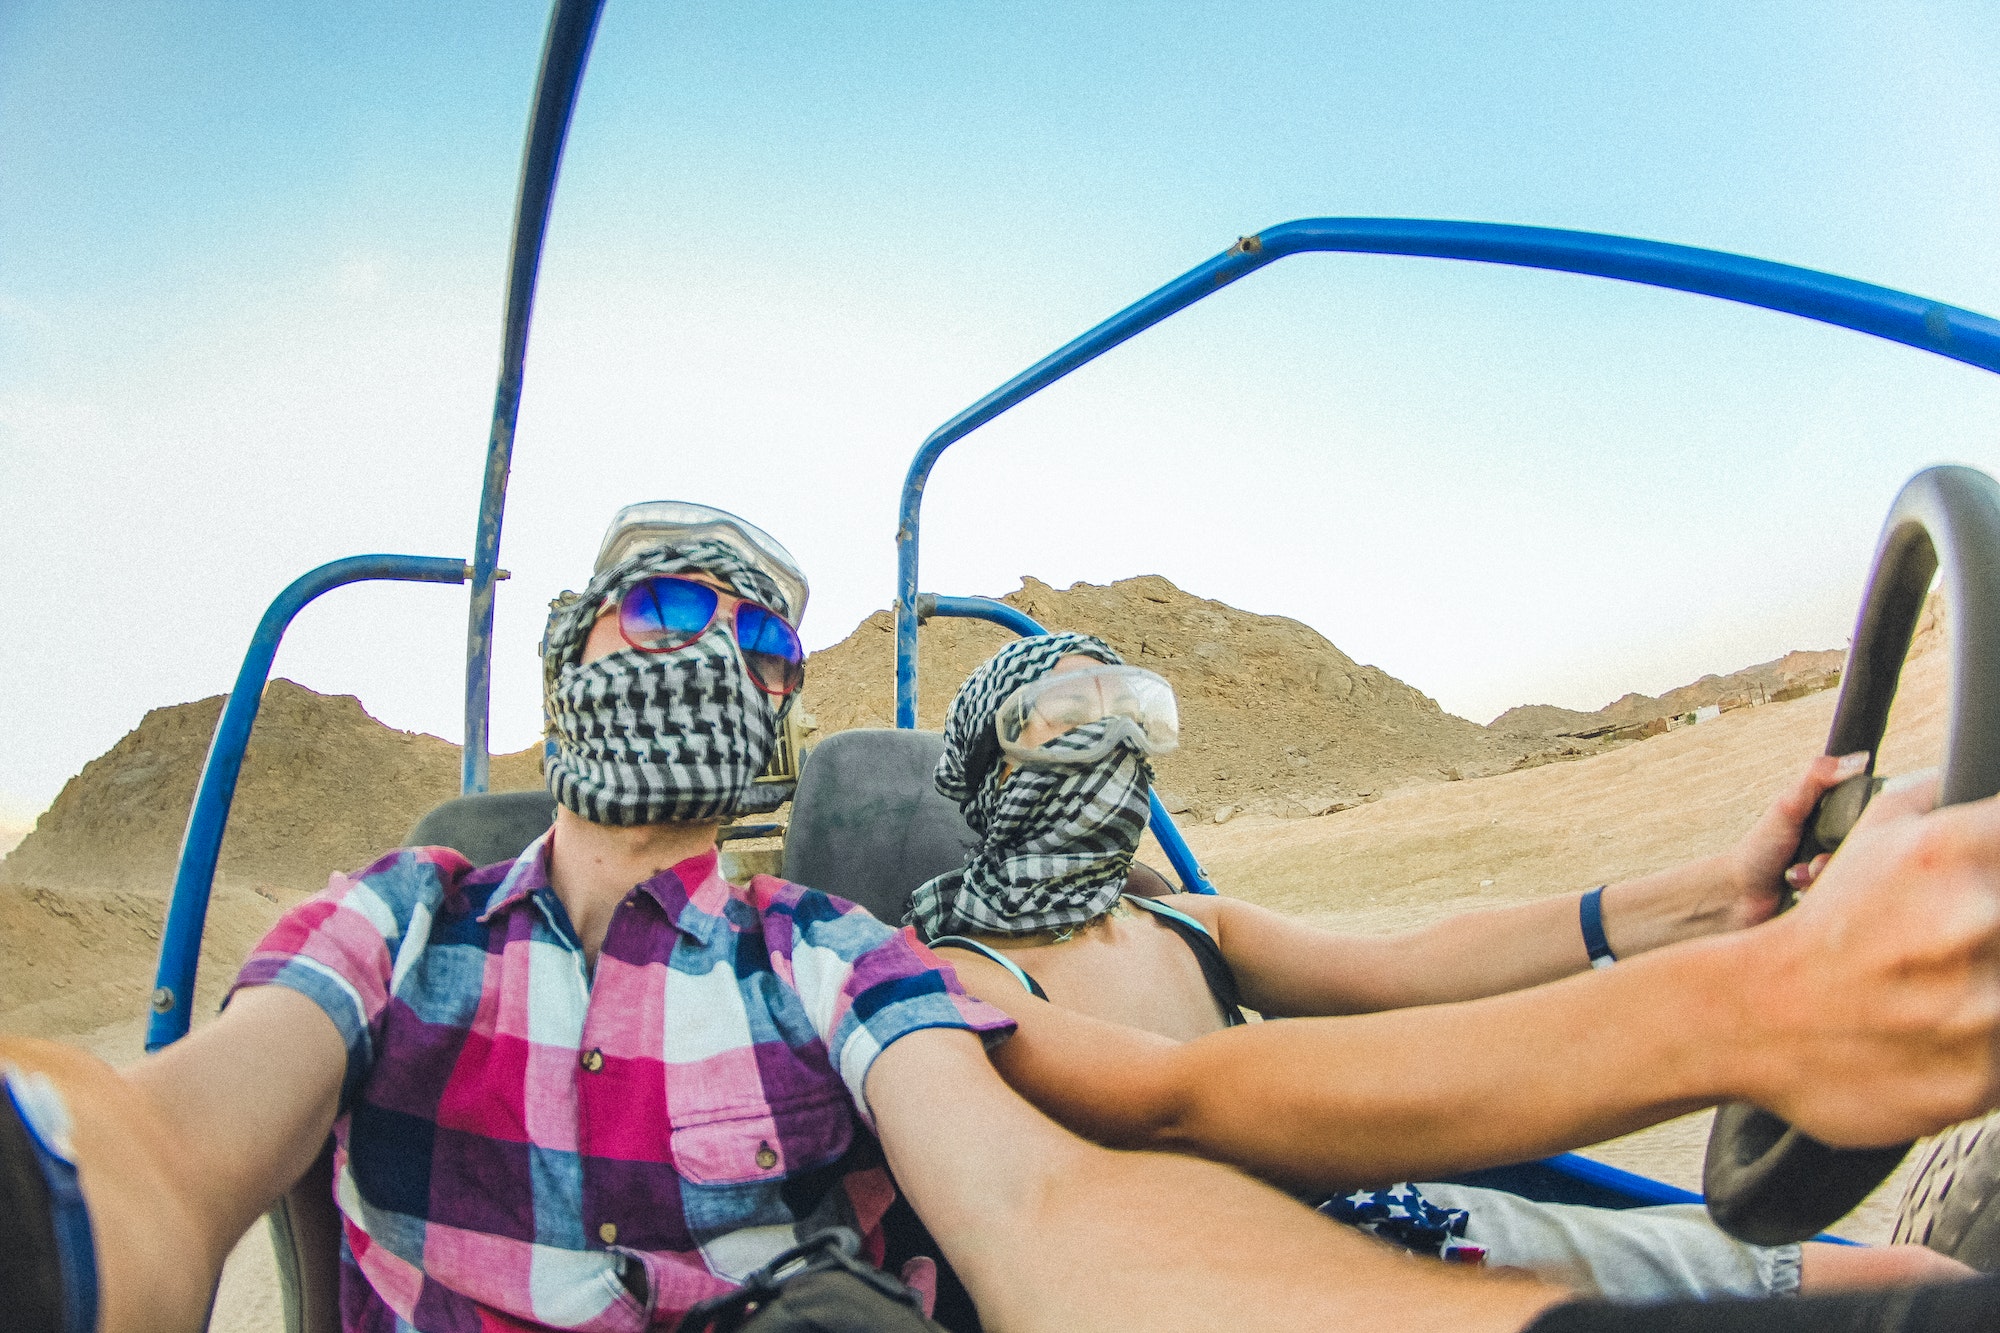 Honeymoon trip to Egypt. A young couple is riding a quad bike in the desert. Excursion in Egypt.